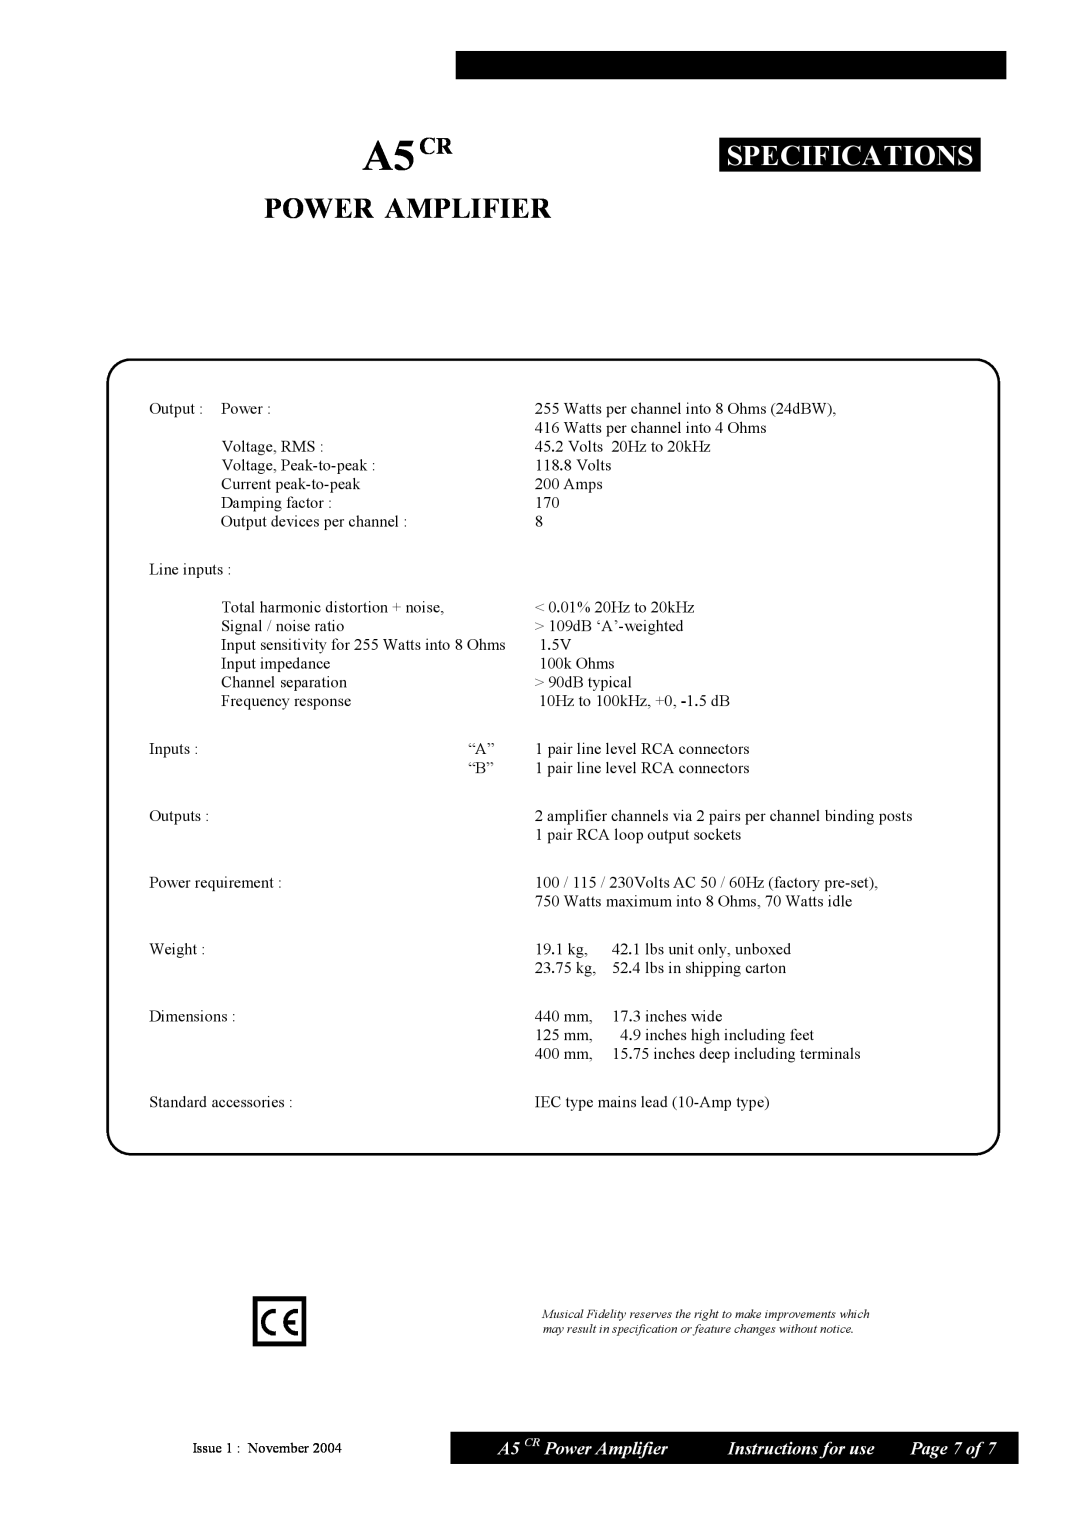 Musical Fidelity manual A5CR.SPECIFICATIONS. POWER AMPLIFIER, A5 CR Power Amplifier, Instructions for use, Page 7 of 